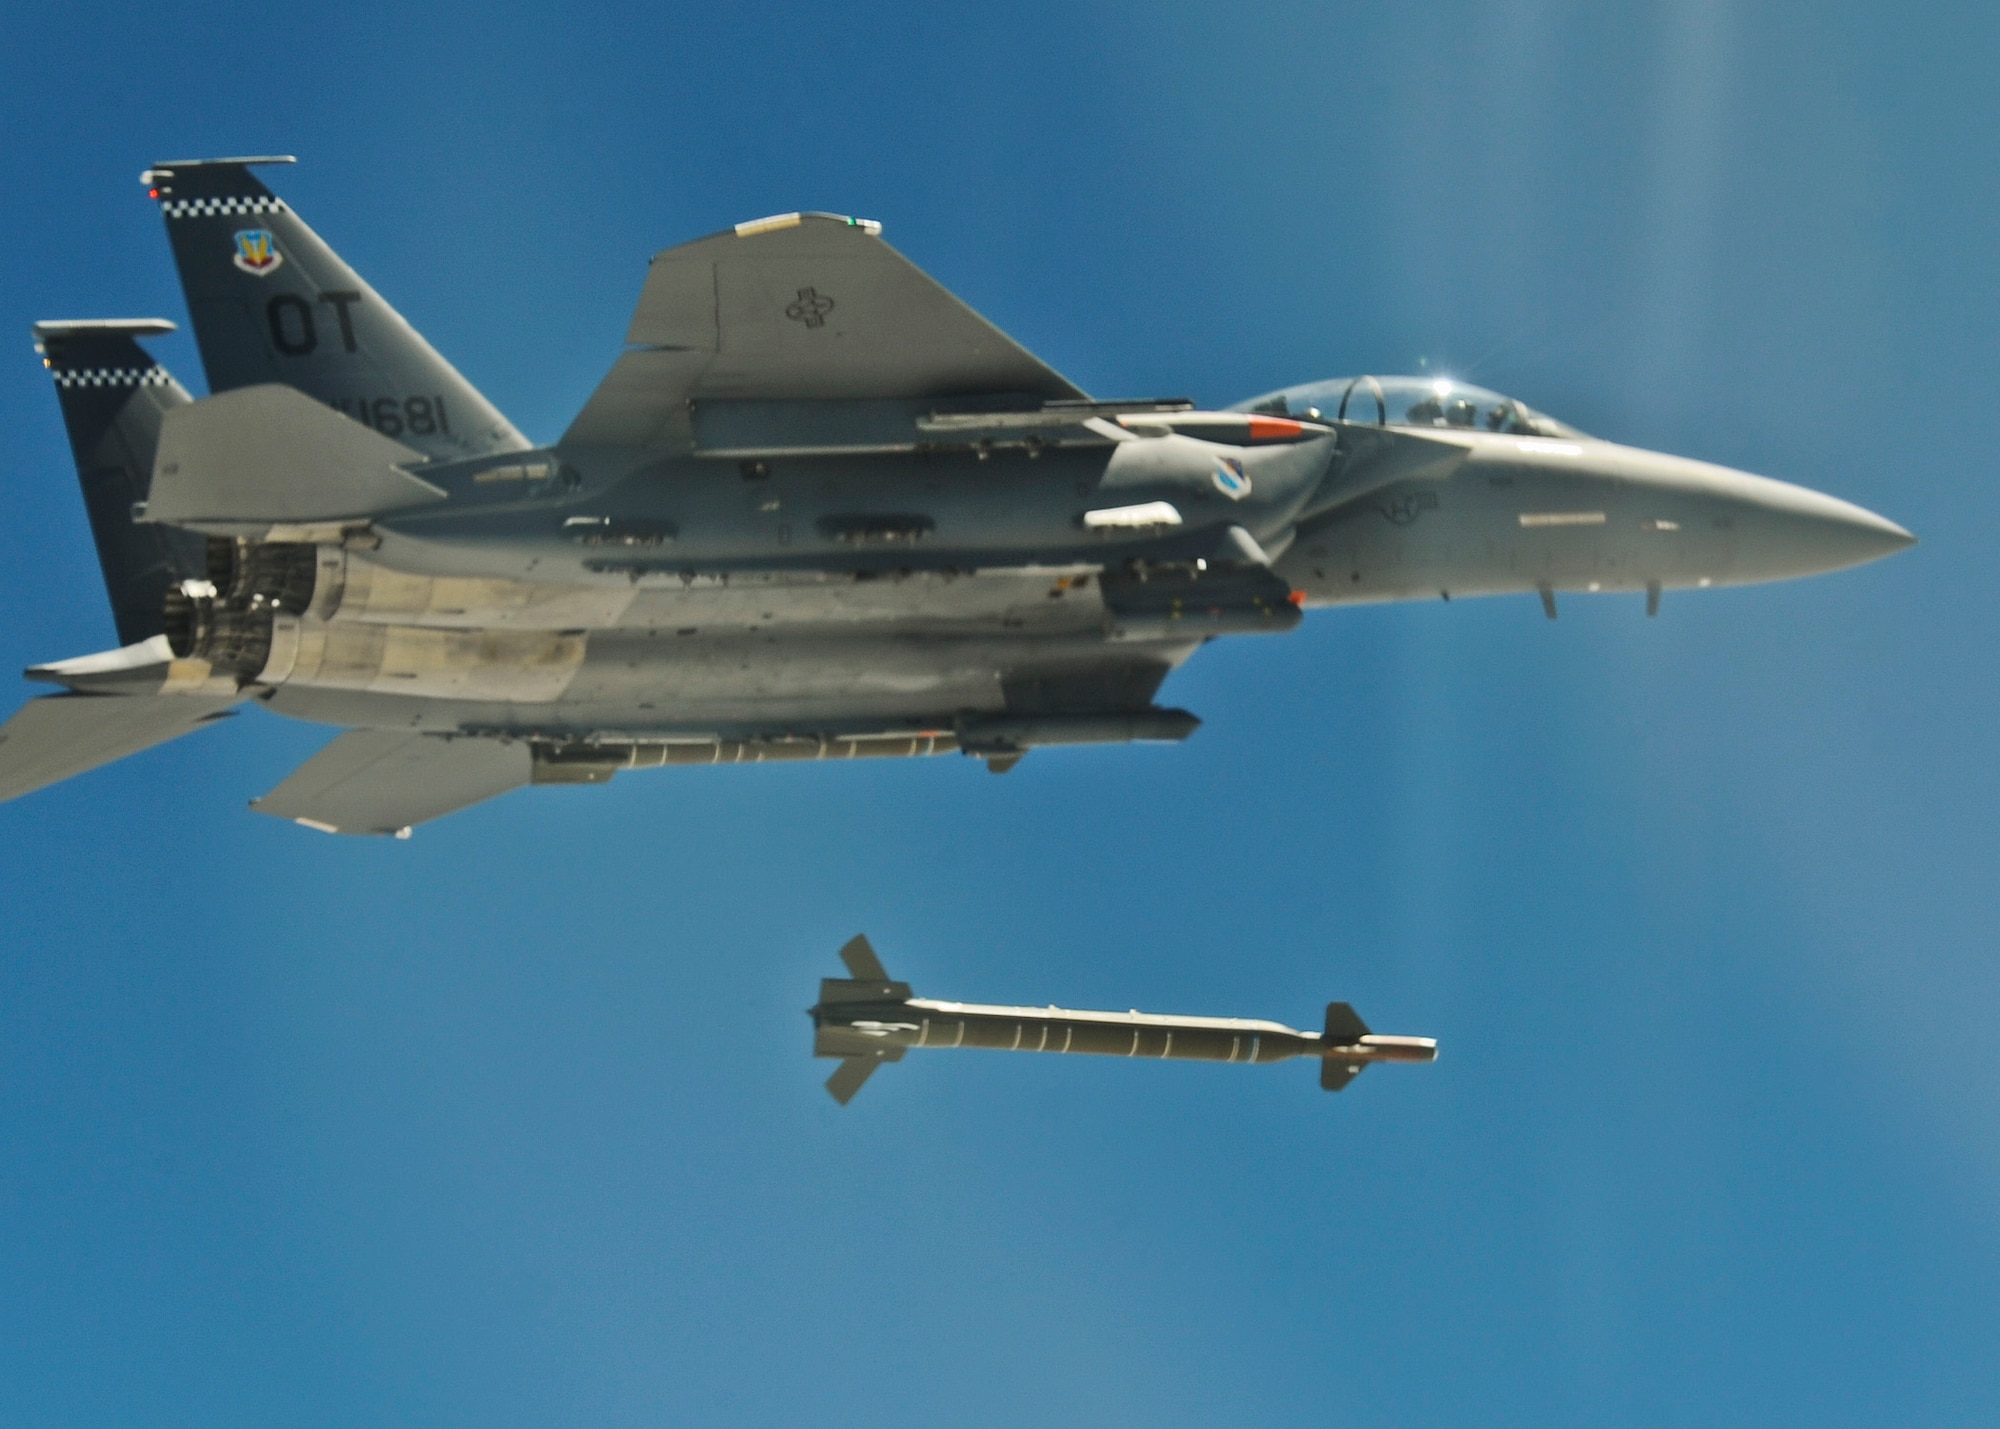 An F-15 from the 85th Test and Evaluation Squadron drops a guided bomb unit during a Combat Hammer mission at Hill Air Force Base, Utah. The 85th TES is part of the 53rd Wing located at Eglin Air Force Base, Fla.  The Combat Hammer missions were part of an annual month-long weapons system evaluation program held at the base by the 53rd Weapons Evaluation Group.  The group is responsible for air-to-ground and air-to-air weapons evaluation for the Air Force.  The air-to-ground unit, known as Combat Hammer, is managed by the 86th Fighter Weapons Squadron, located at Eglin.  The air-to-air unit, known as Combat Archer, is managed by the 83rd Fighter Weapons Squadron, located at Tyndall AFB, Fla. (Courtesy photo)